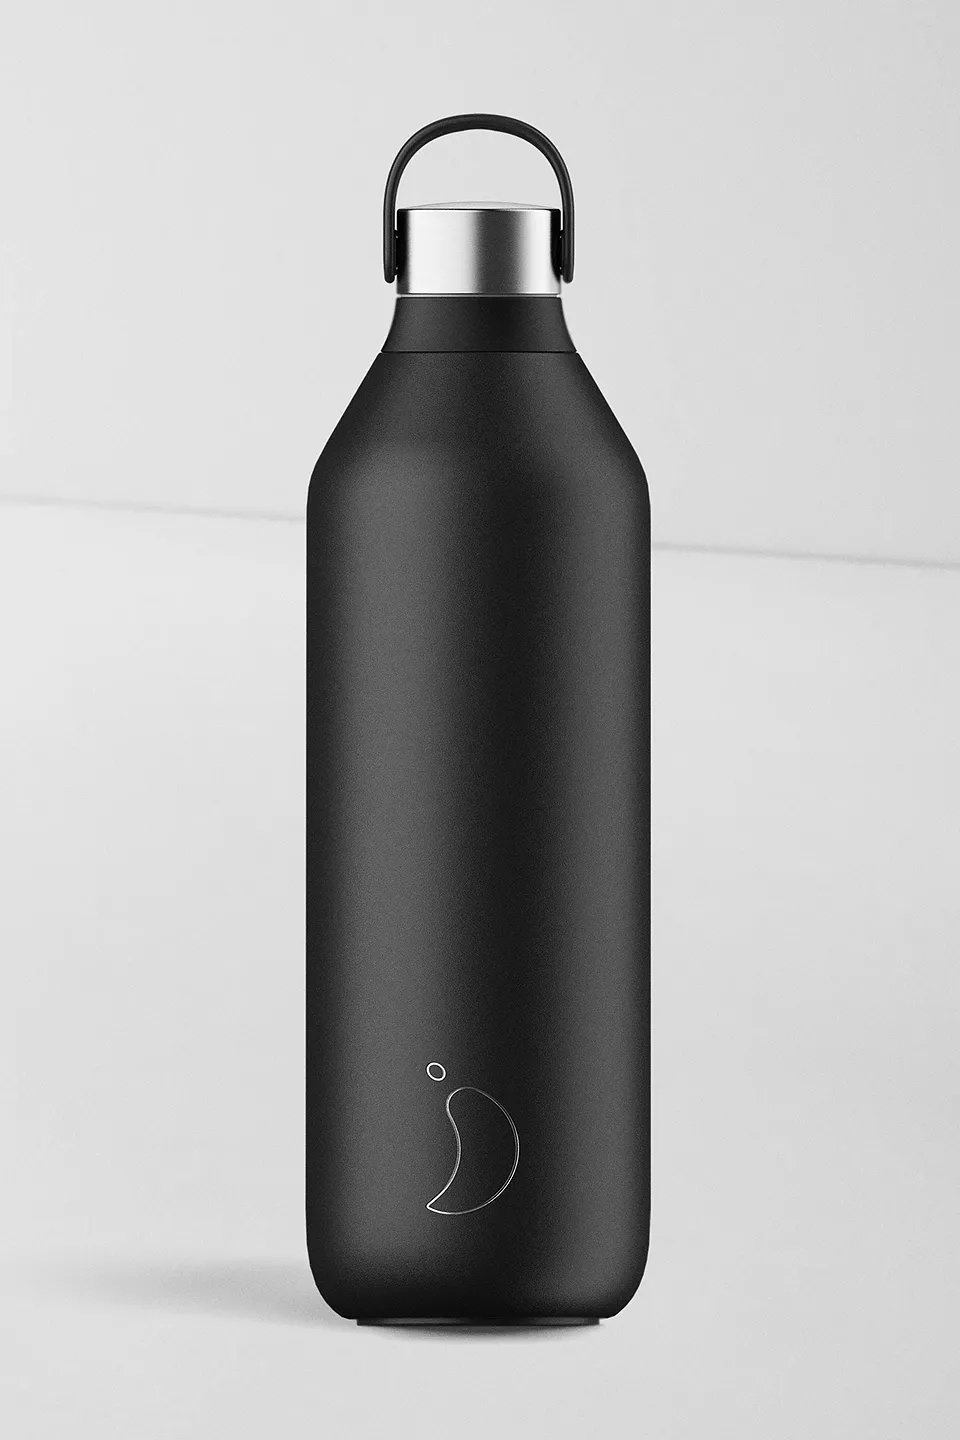 urbanoutfitters.com | Chilly’s 1L Series 2 Stainless Steel Water Bottle